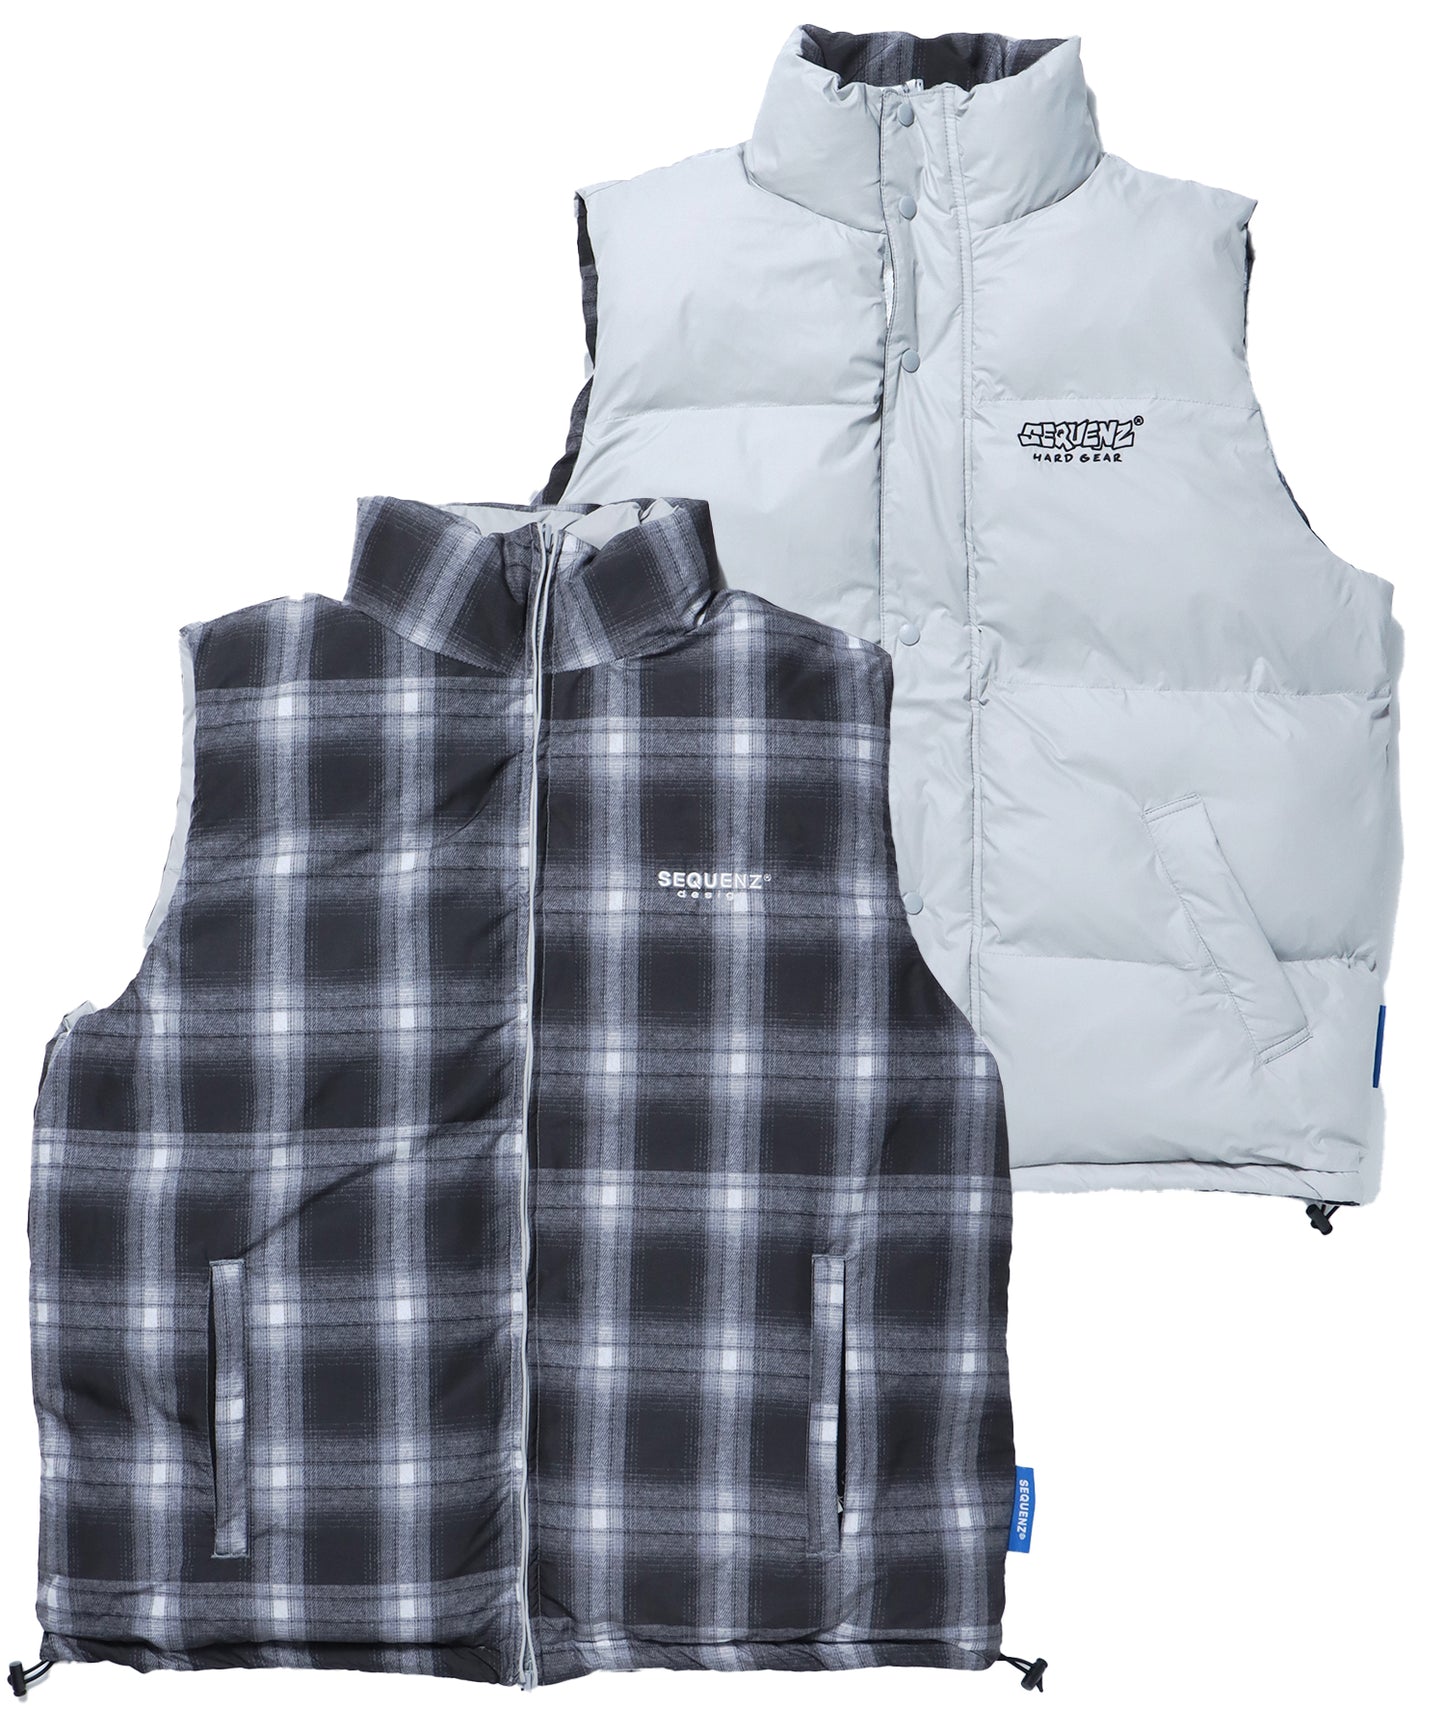 【SEQUENZ】 REVERSIBLE SYNTHETIC DOWN VEST / リバーシブル ワンポイント ロゴ ナイロン スタンド ベスト OMBRE CHECK×L.GRAY